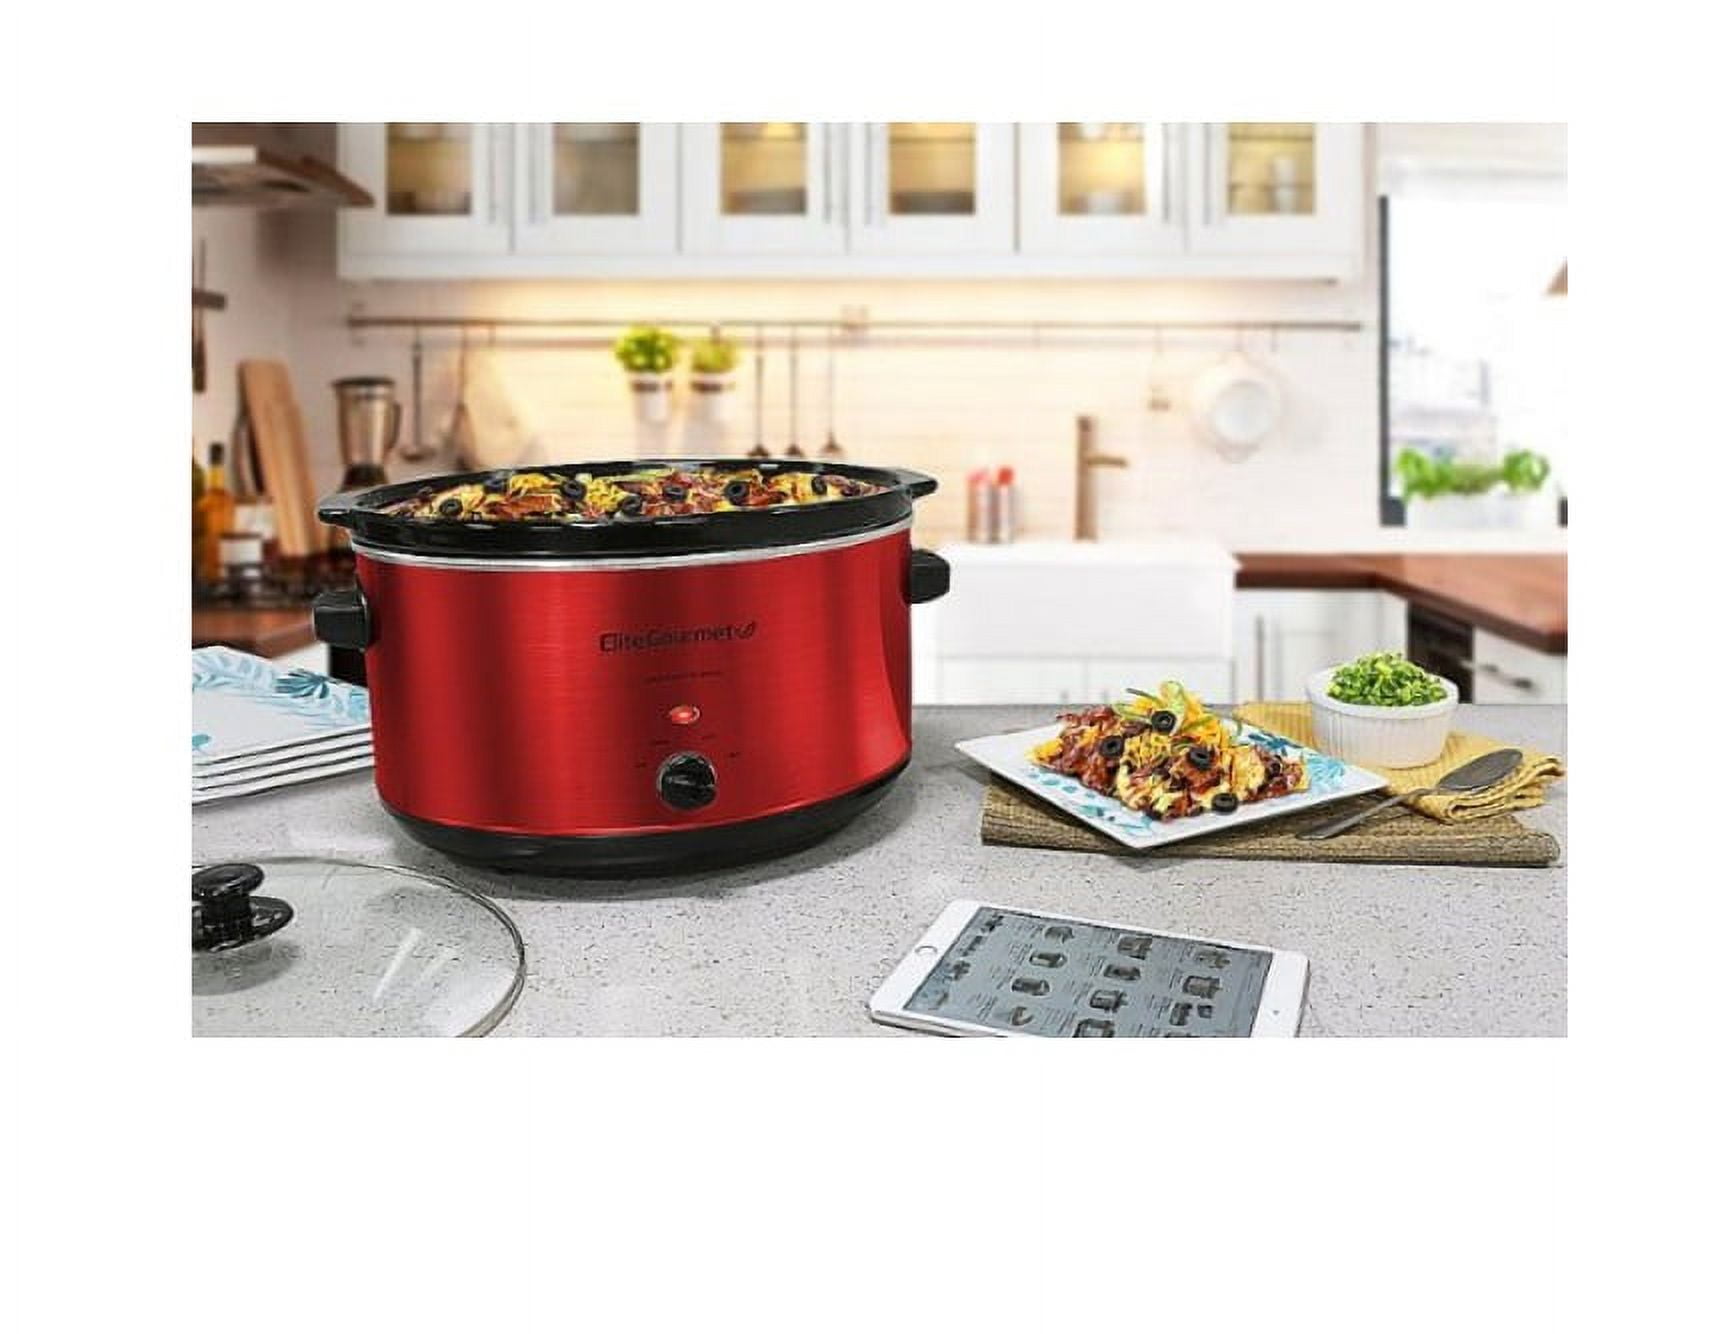 Marvel's Avengers Kawaii 2 Qt. Slow Cooker, Cookers & Steamers, Furniture  & Appliances